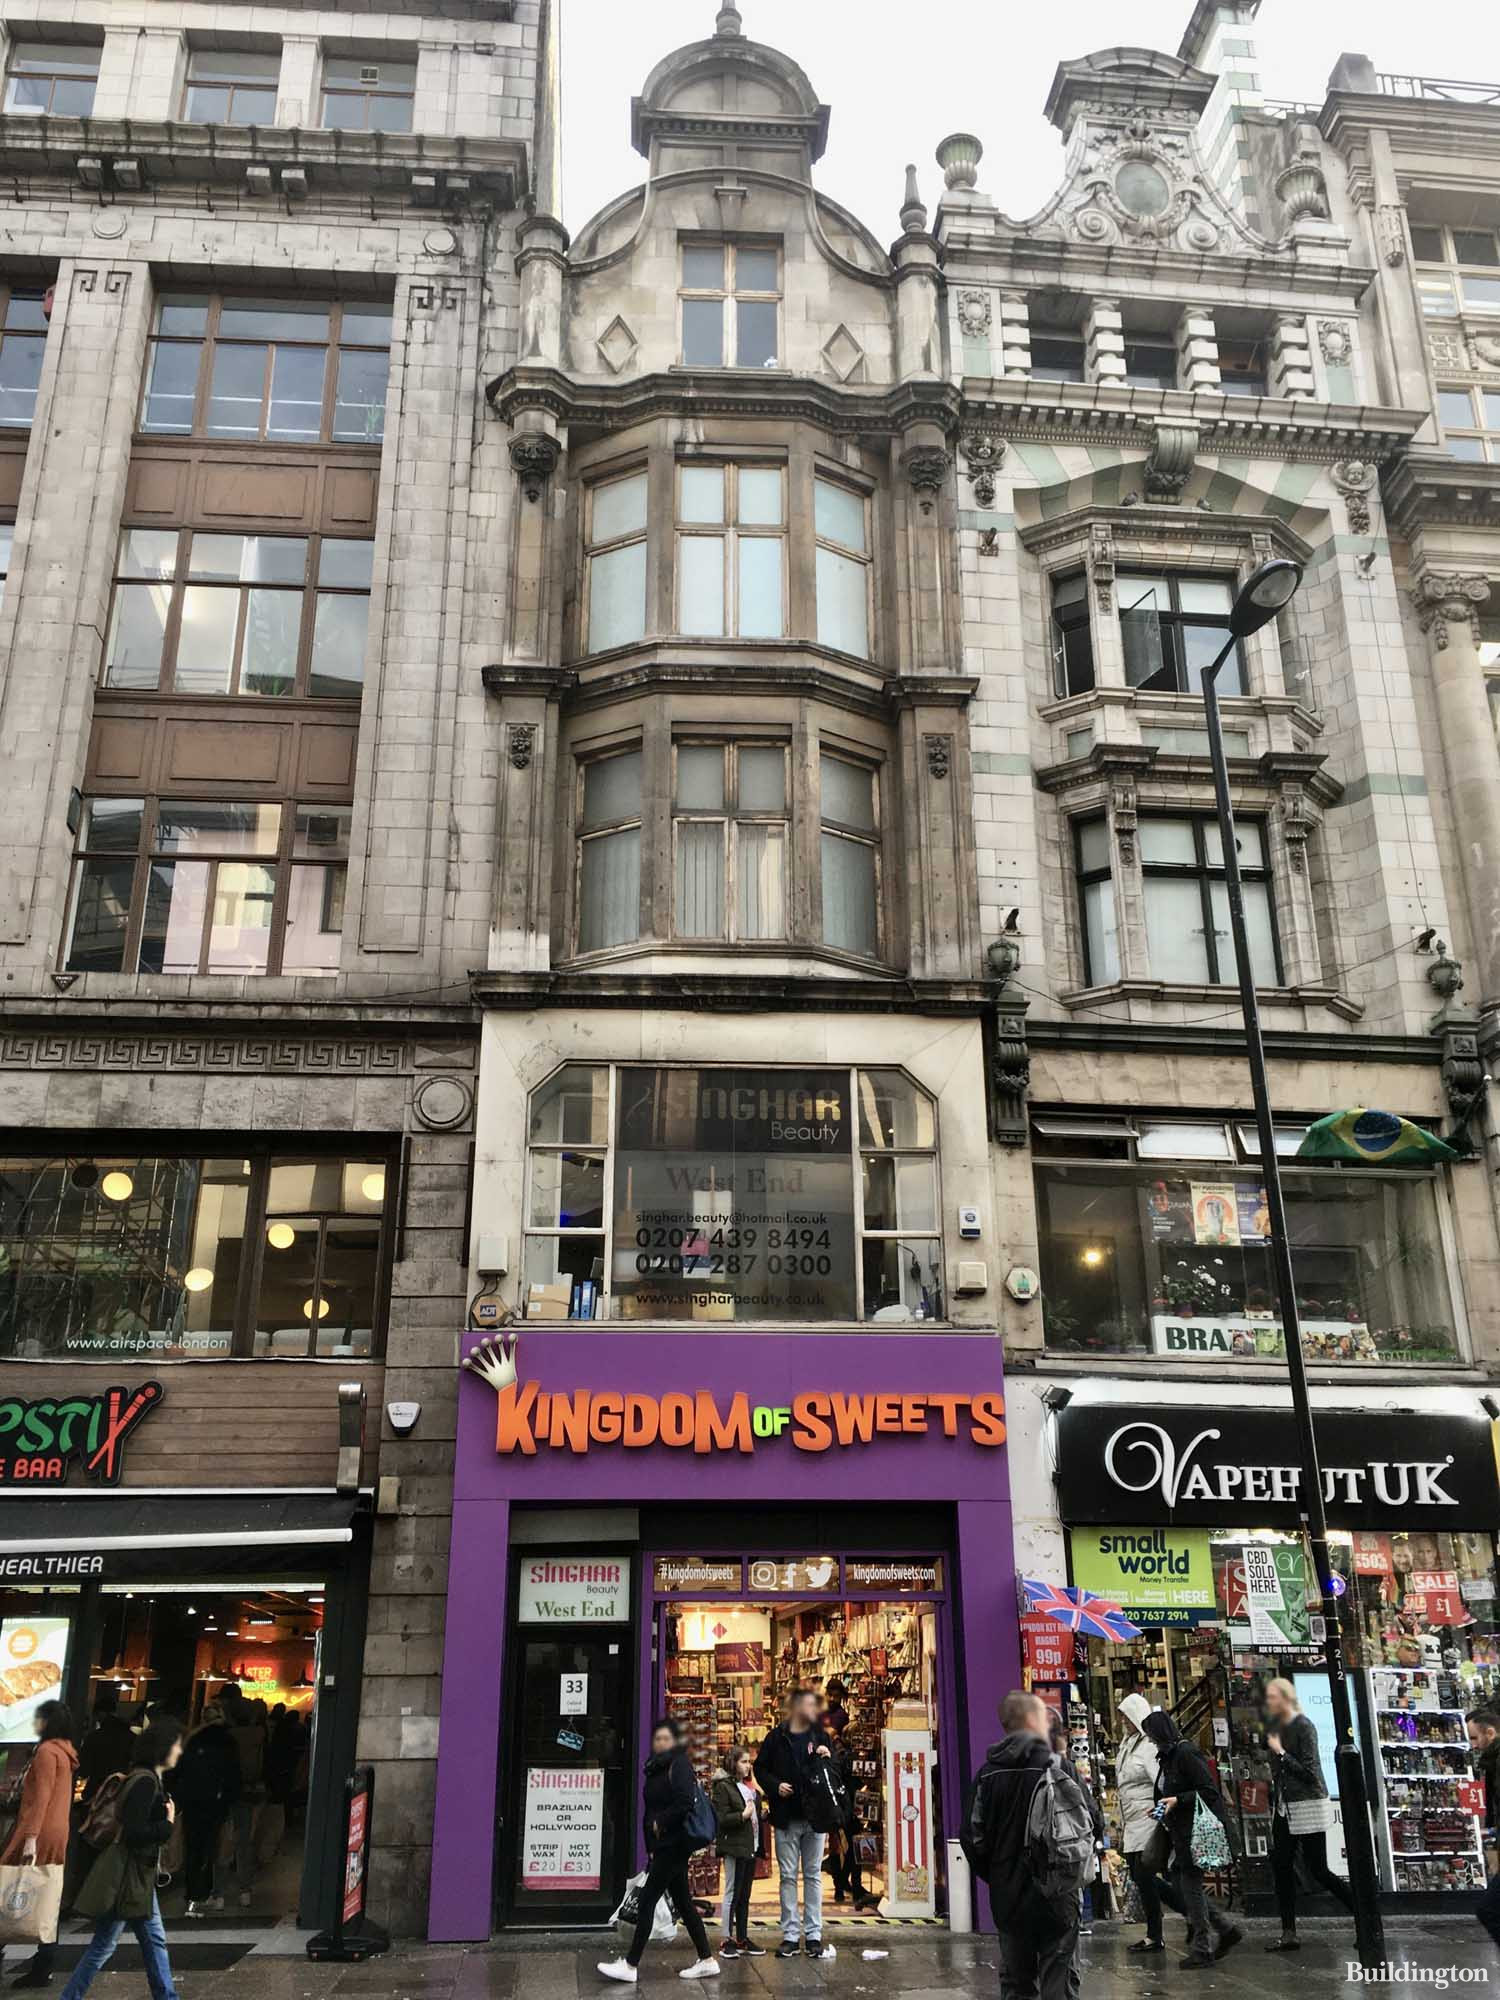 Kingdom of Sweets and Singhar Beauty at 33 Oxford Street building in Soho, London W1. Building exterior.